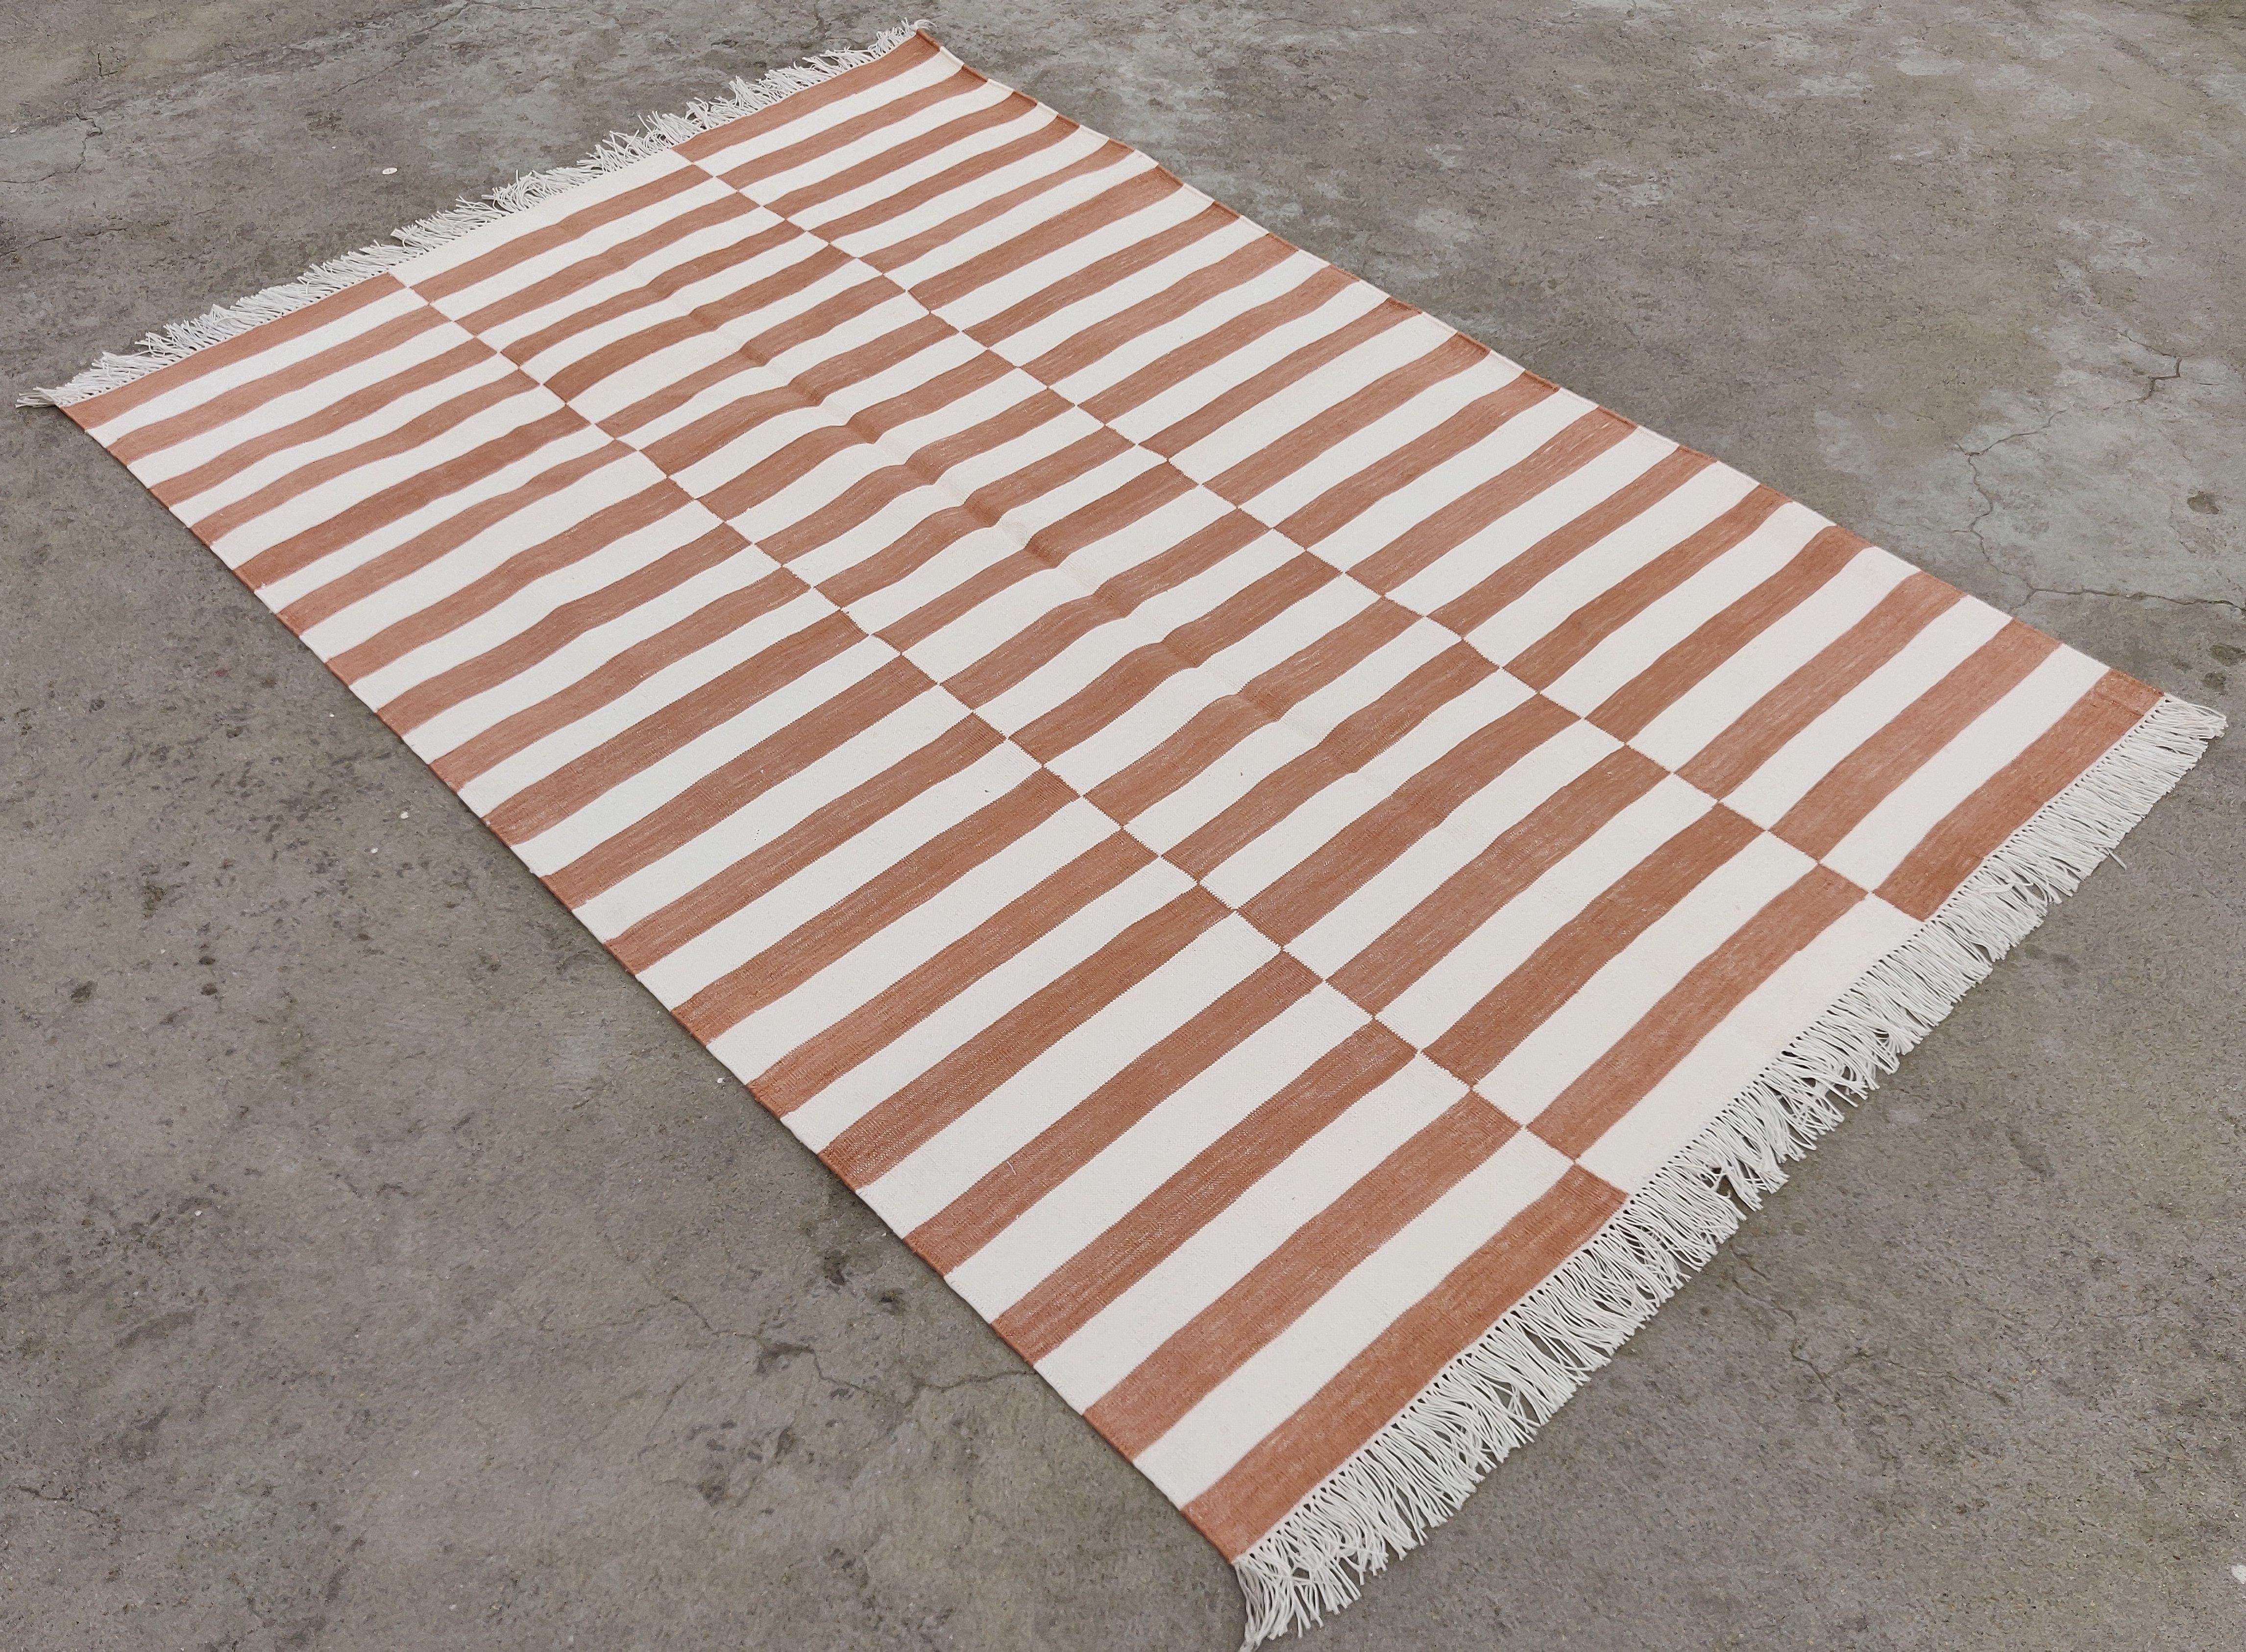 Cotton Vegetable Dyed Tan And White Up Down Striped Indian Rug-4'x6'

These special flat-weave dhurries are hand-woven with 15 ply 100% cotton yarn. Due to the special manufacturing techniques used to create our rugs, the size and color of each